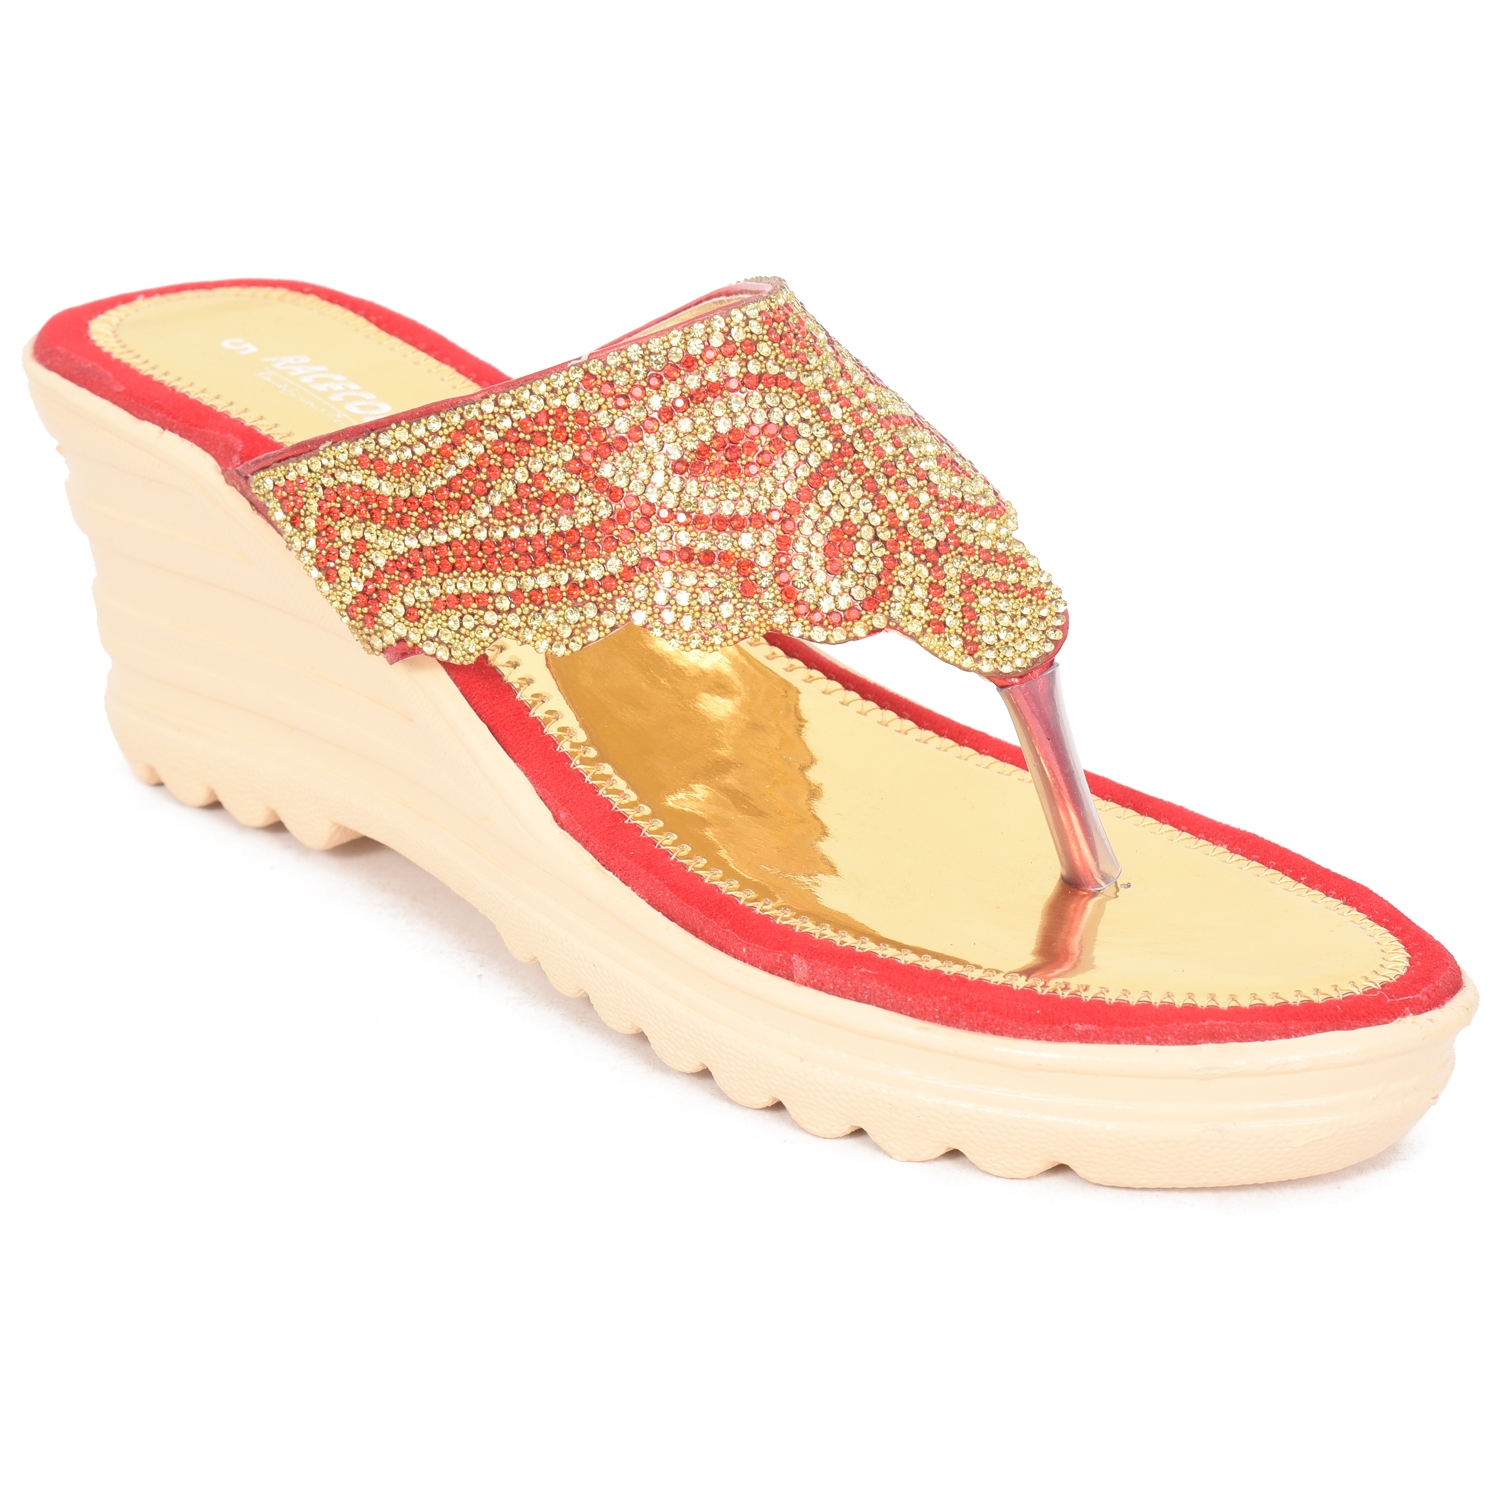 Racecourse | Racecourse Women's Wedges Heel Ready Made China Upper Taj Barmish With the Heel Height of 2.5 Inch 139 Red